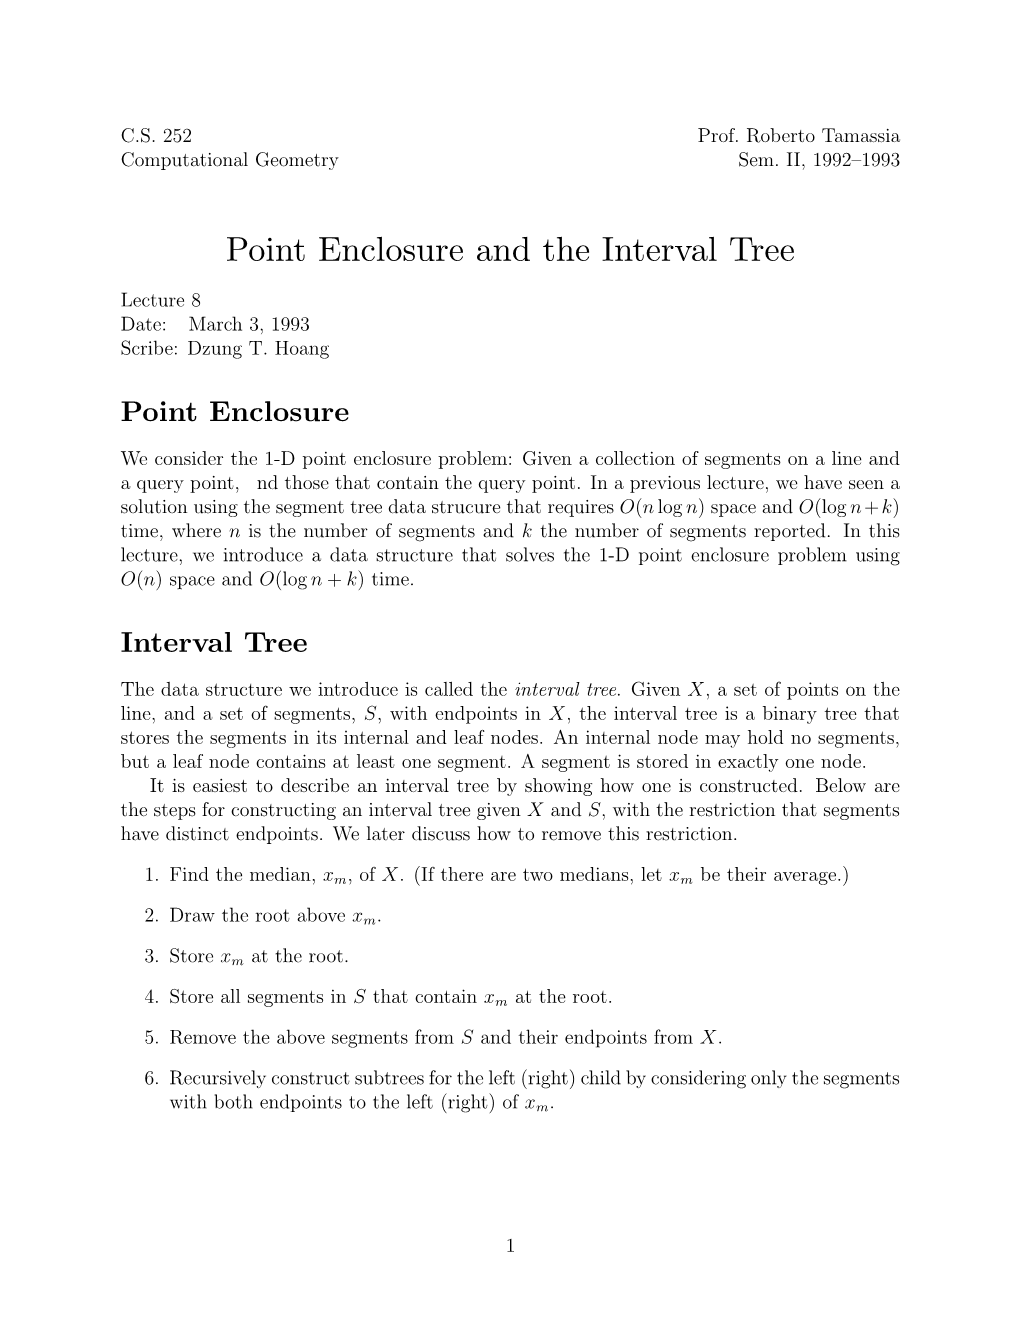 Point Enclosure and the Interval Tree